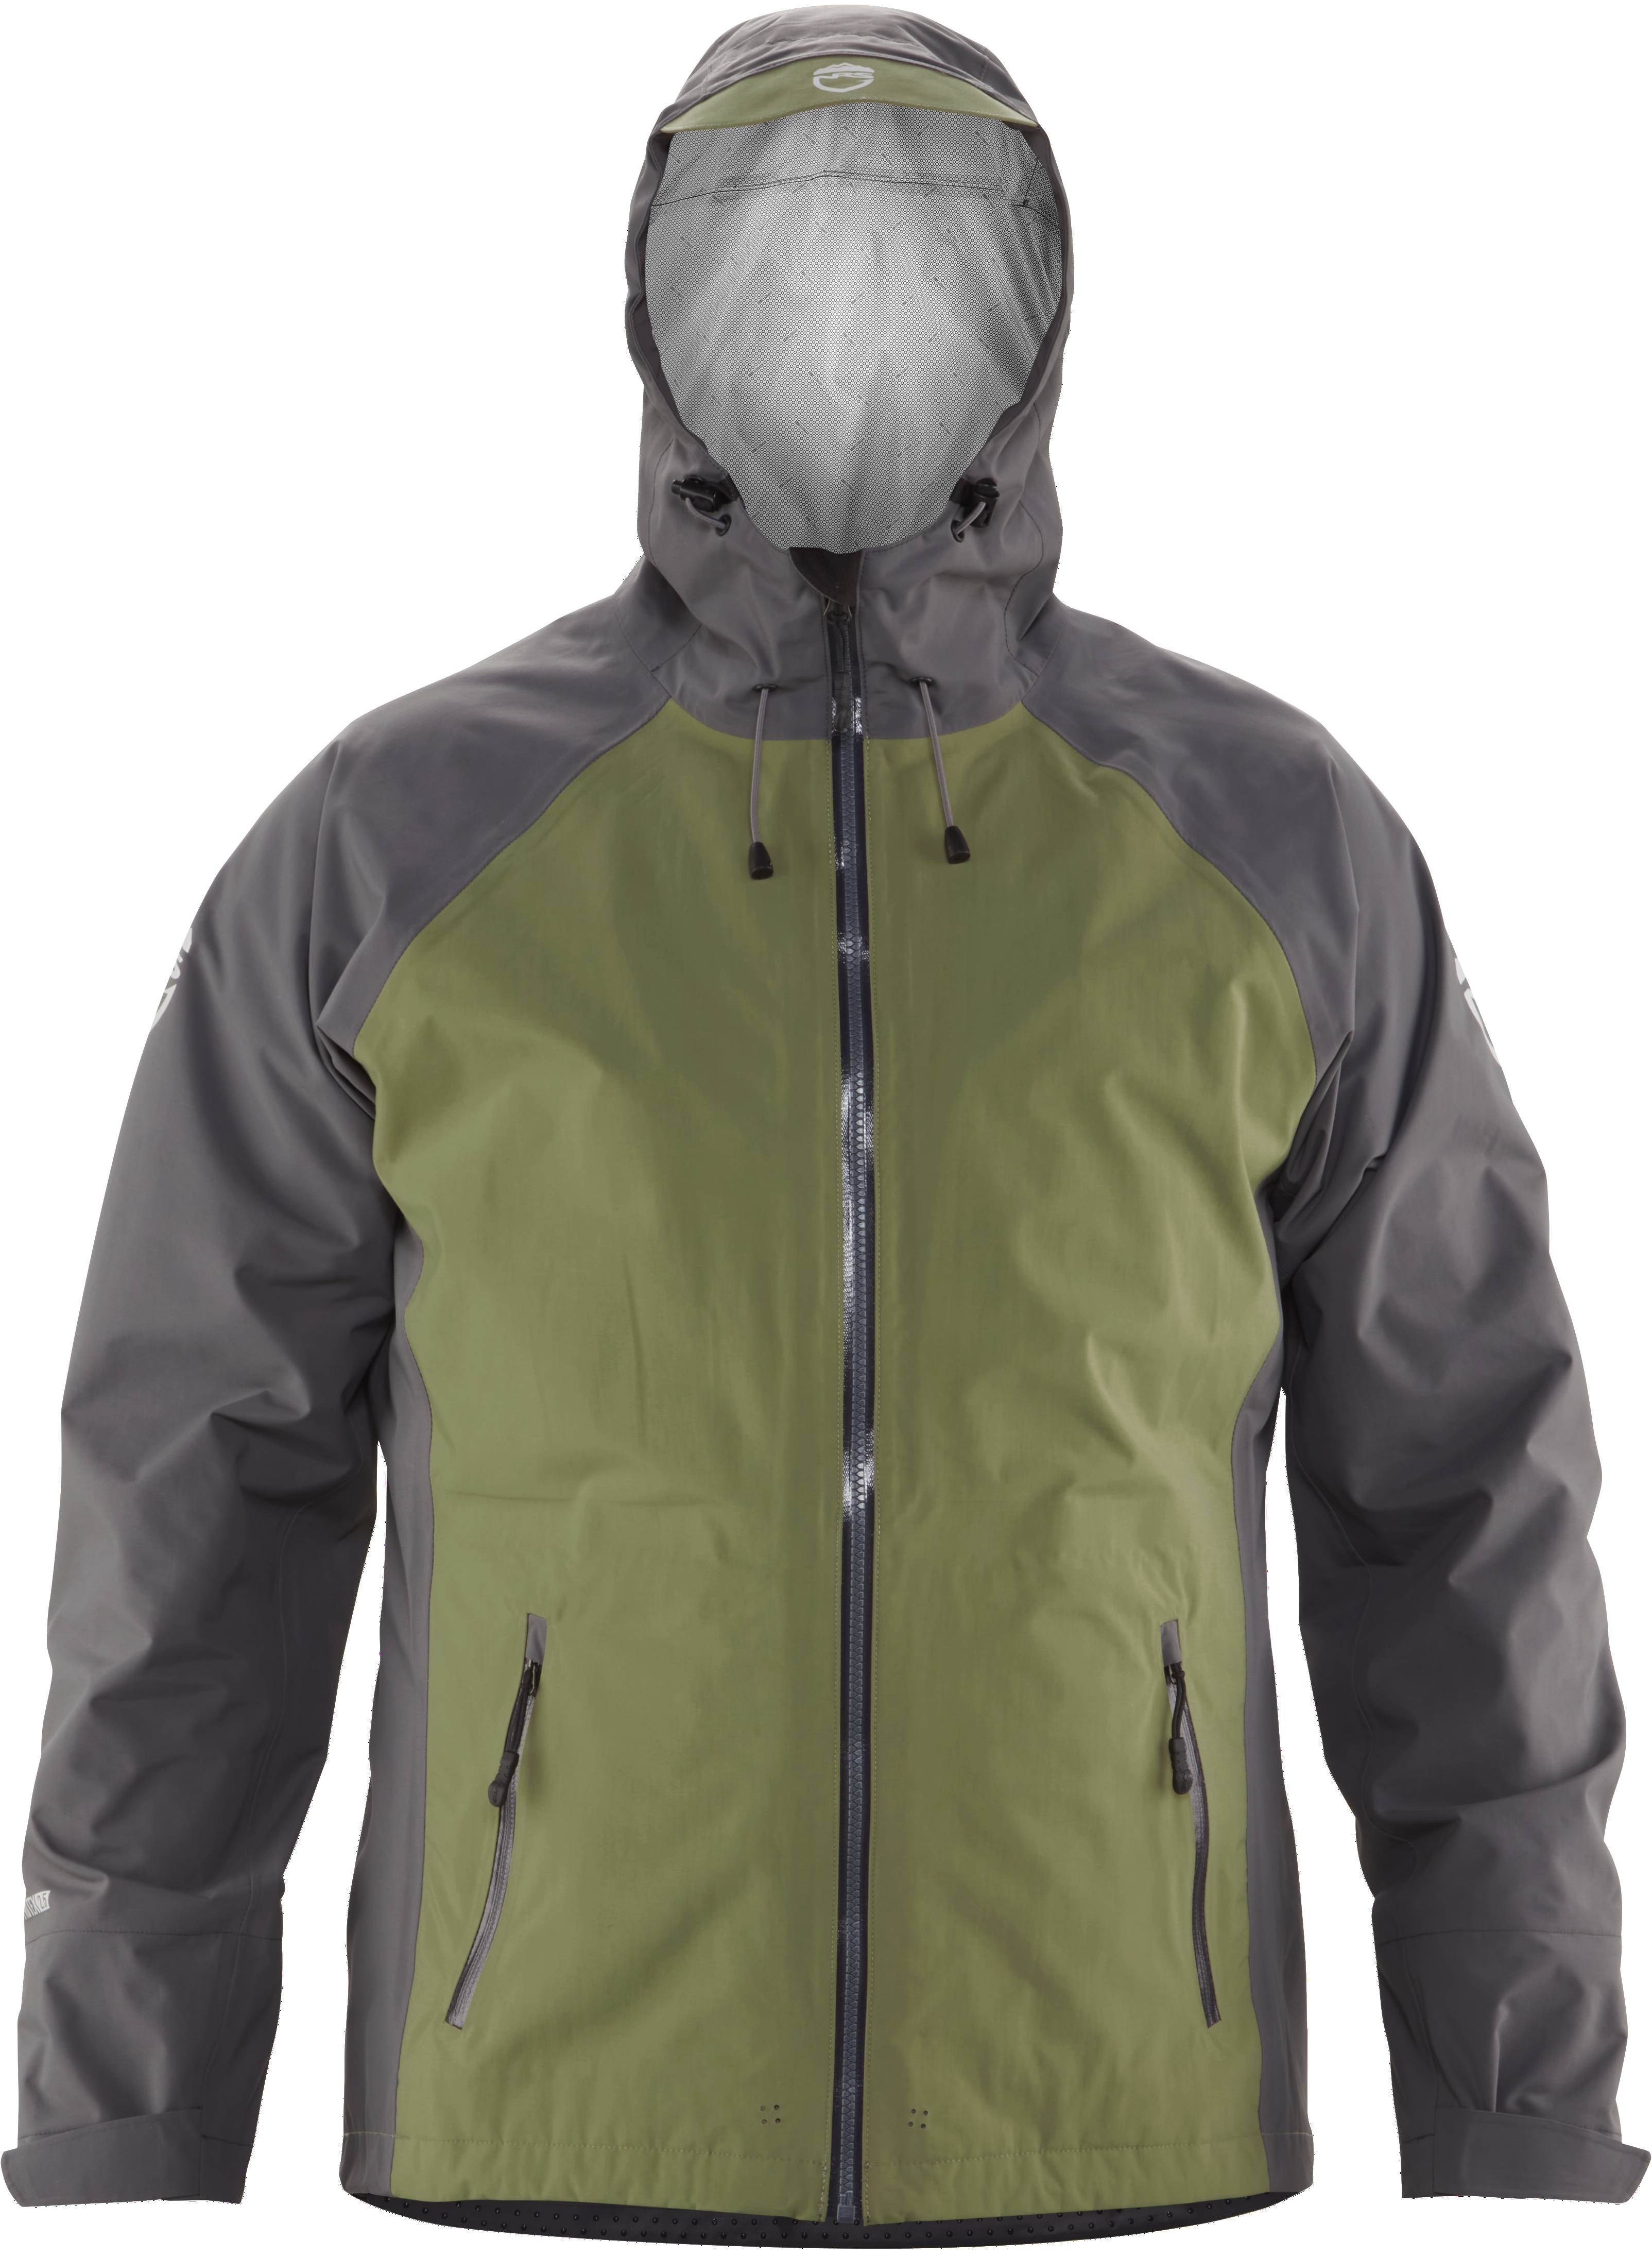 Fishing Apparel - Outerwear, Base layers, Wetsuits, Casualwear ...